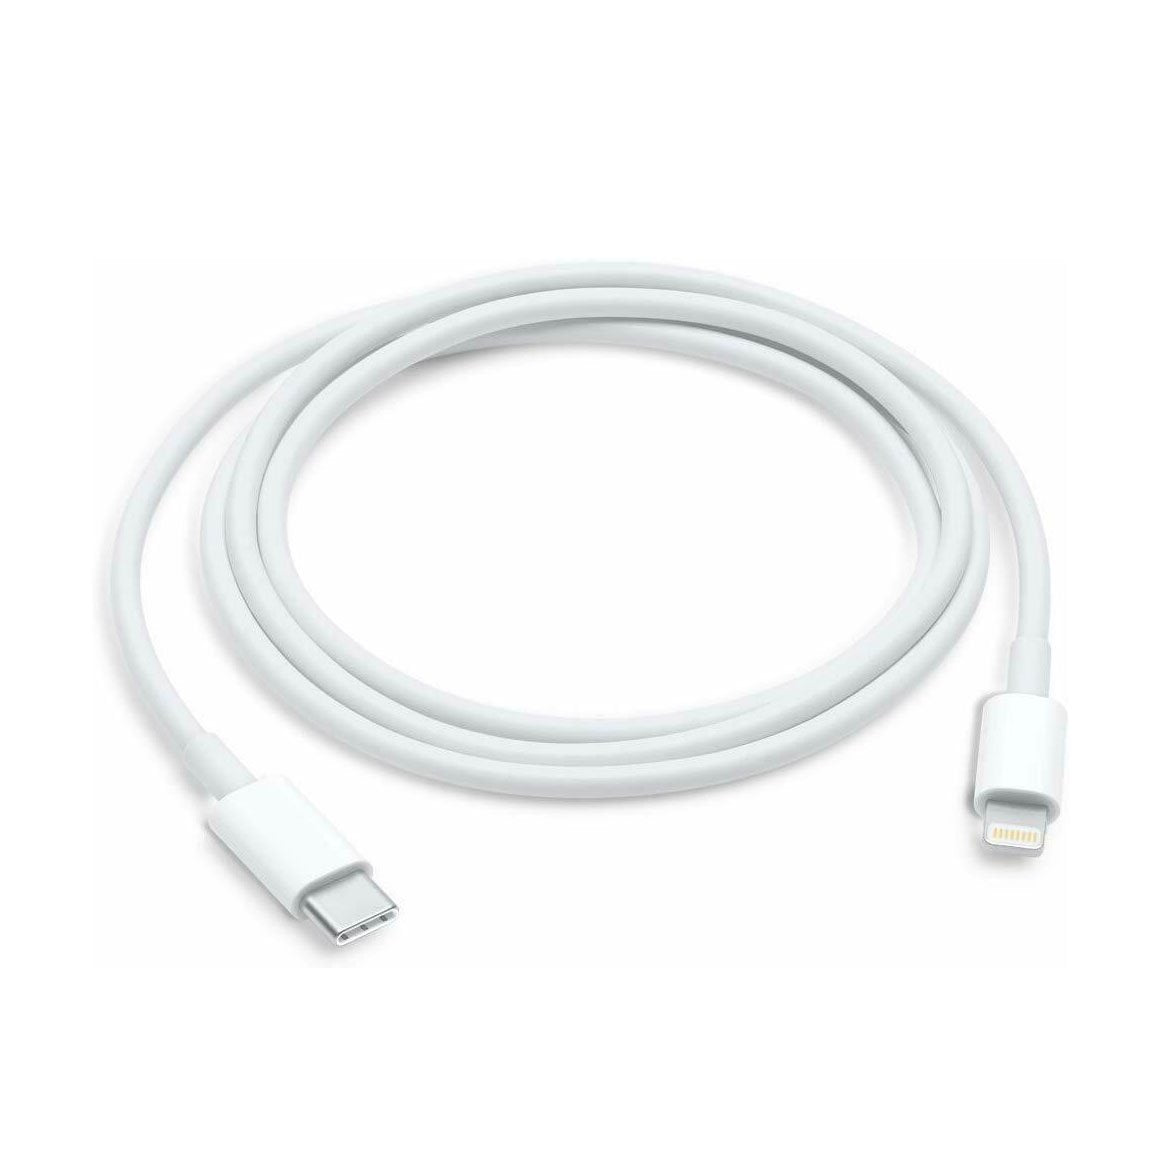 2m USB-C Type C Male to 8 Pin Male Cable